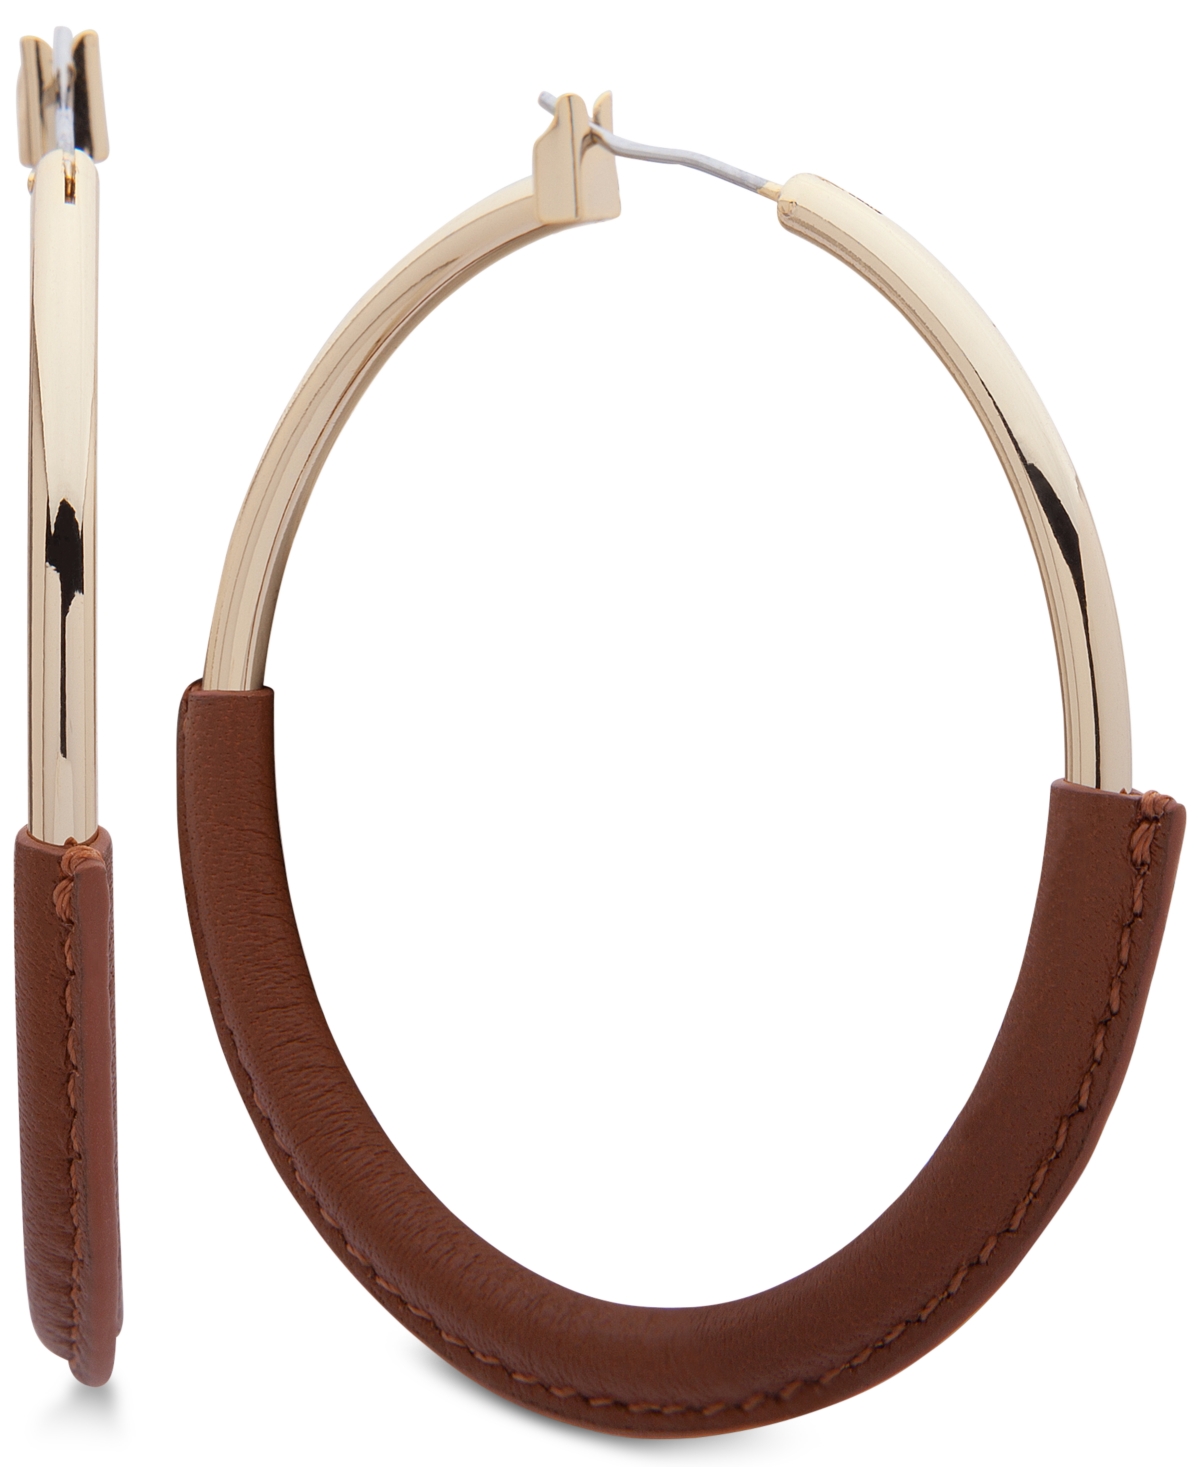 Large Leather-Wrapped Large Hoop Earrings 2-1/4" - Brown